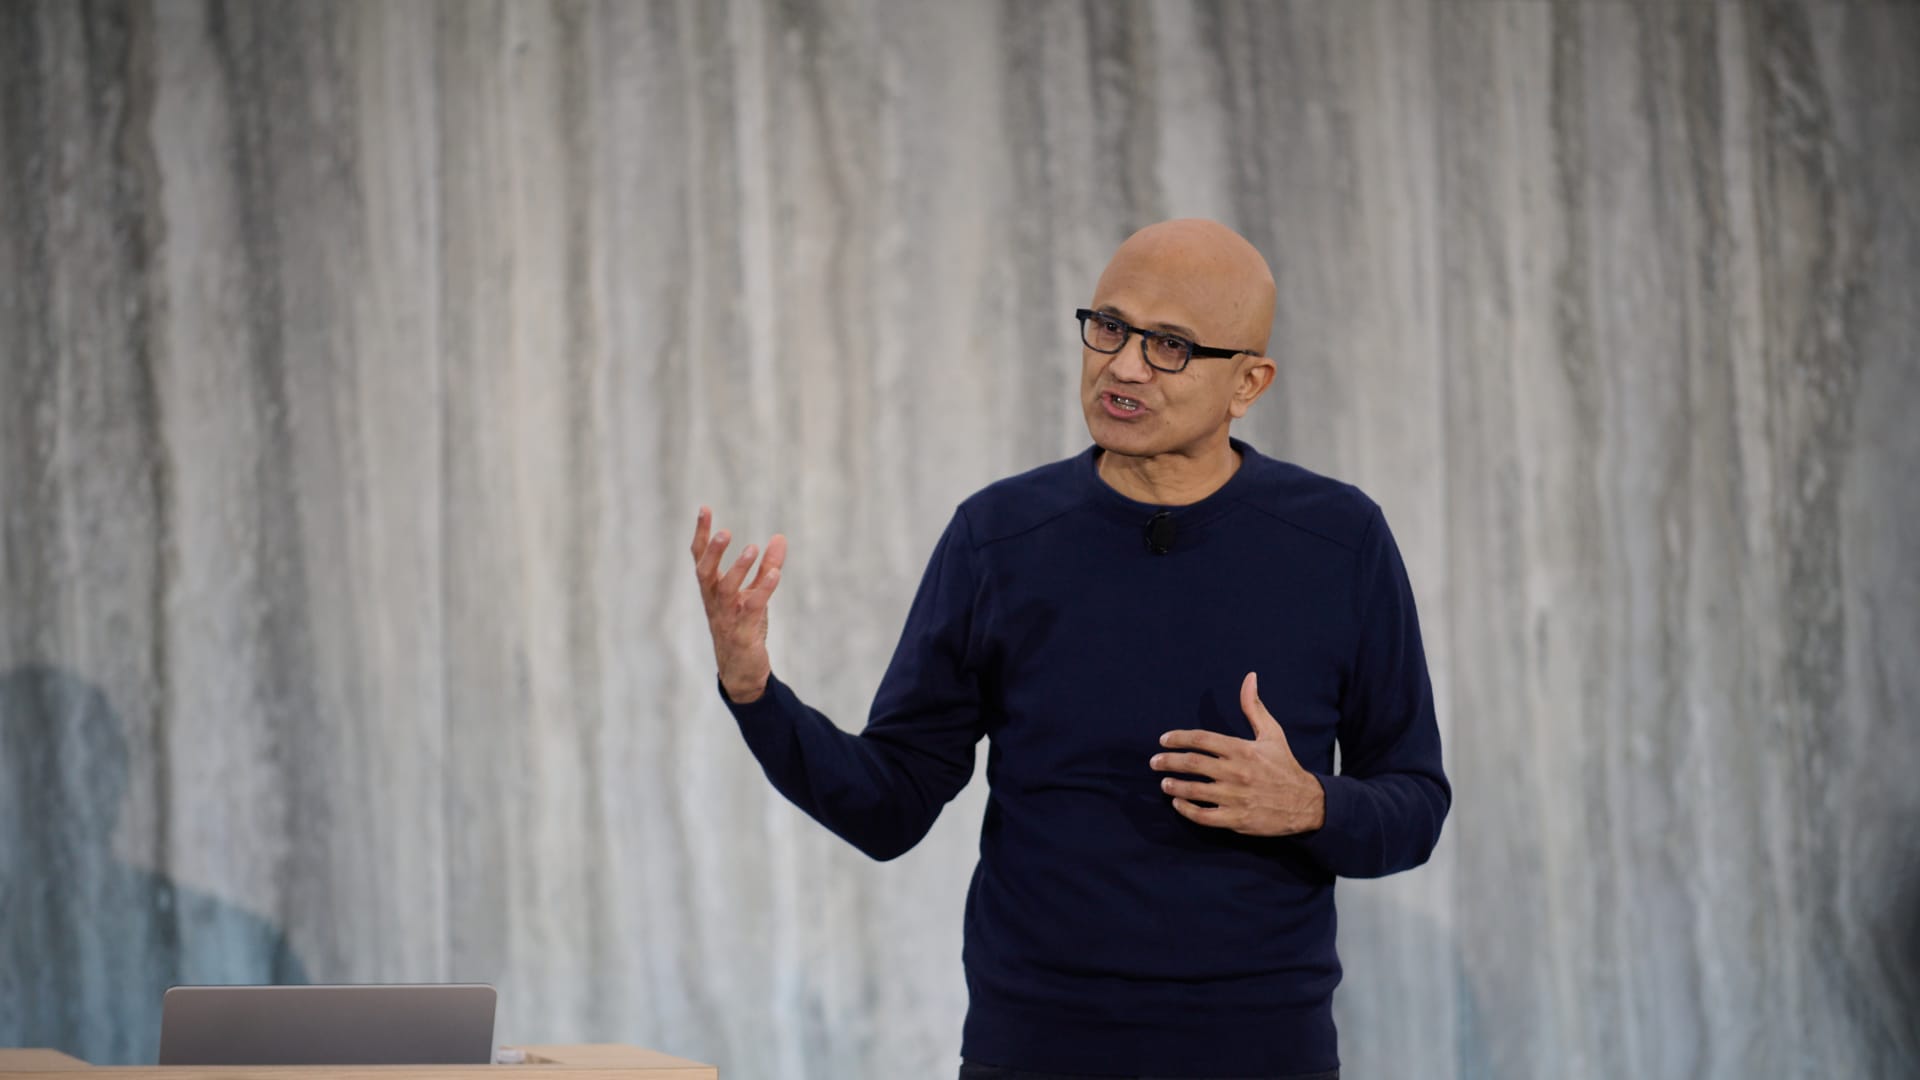 Microsoft will offer ChatGPT tech for companies to customize: source